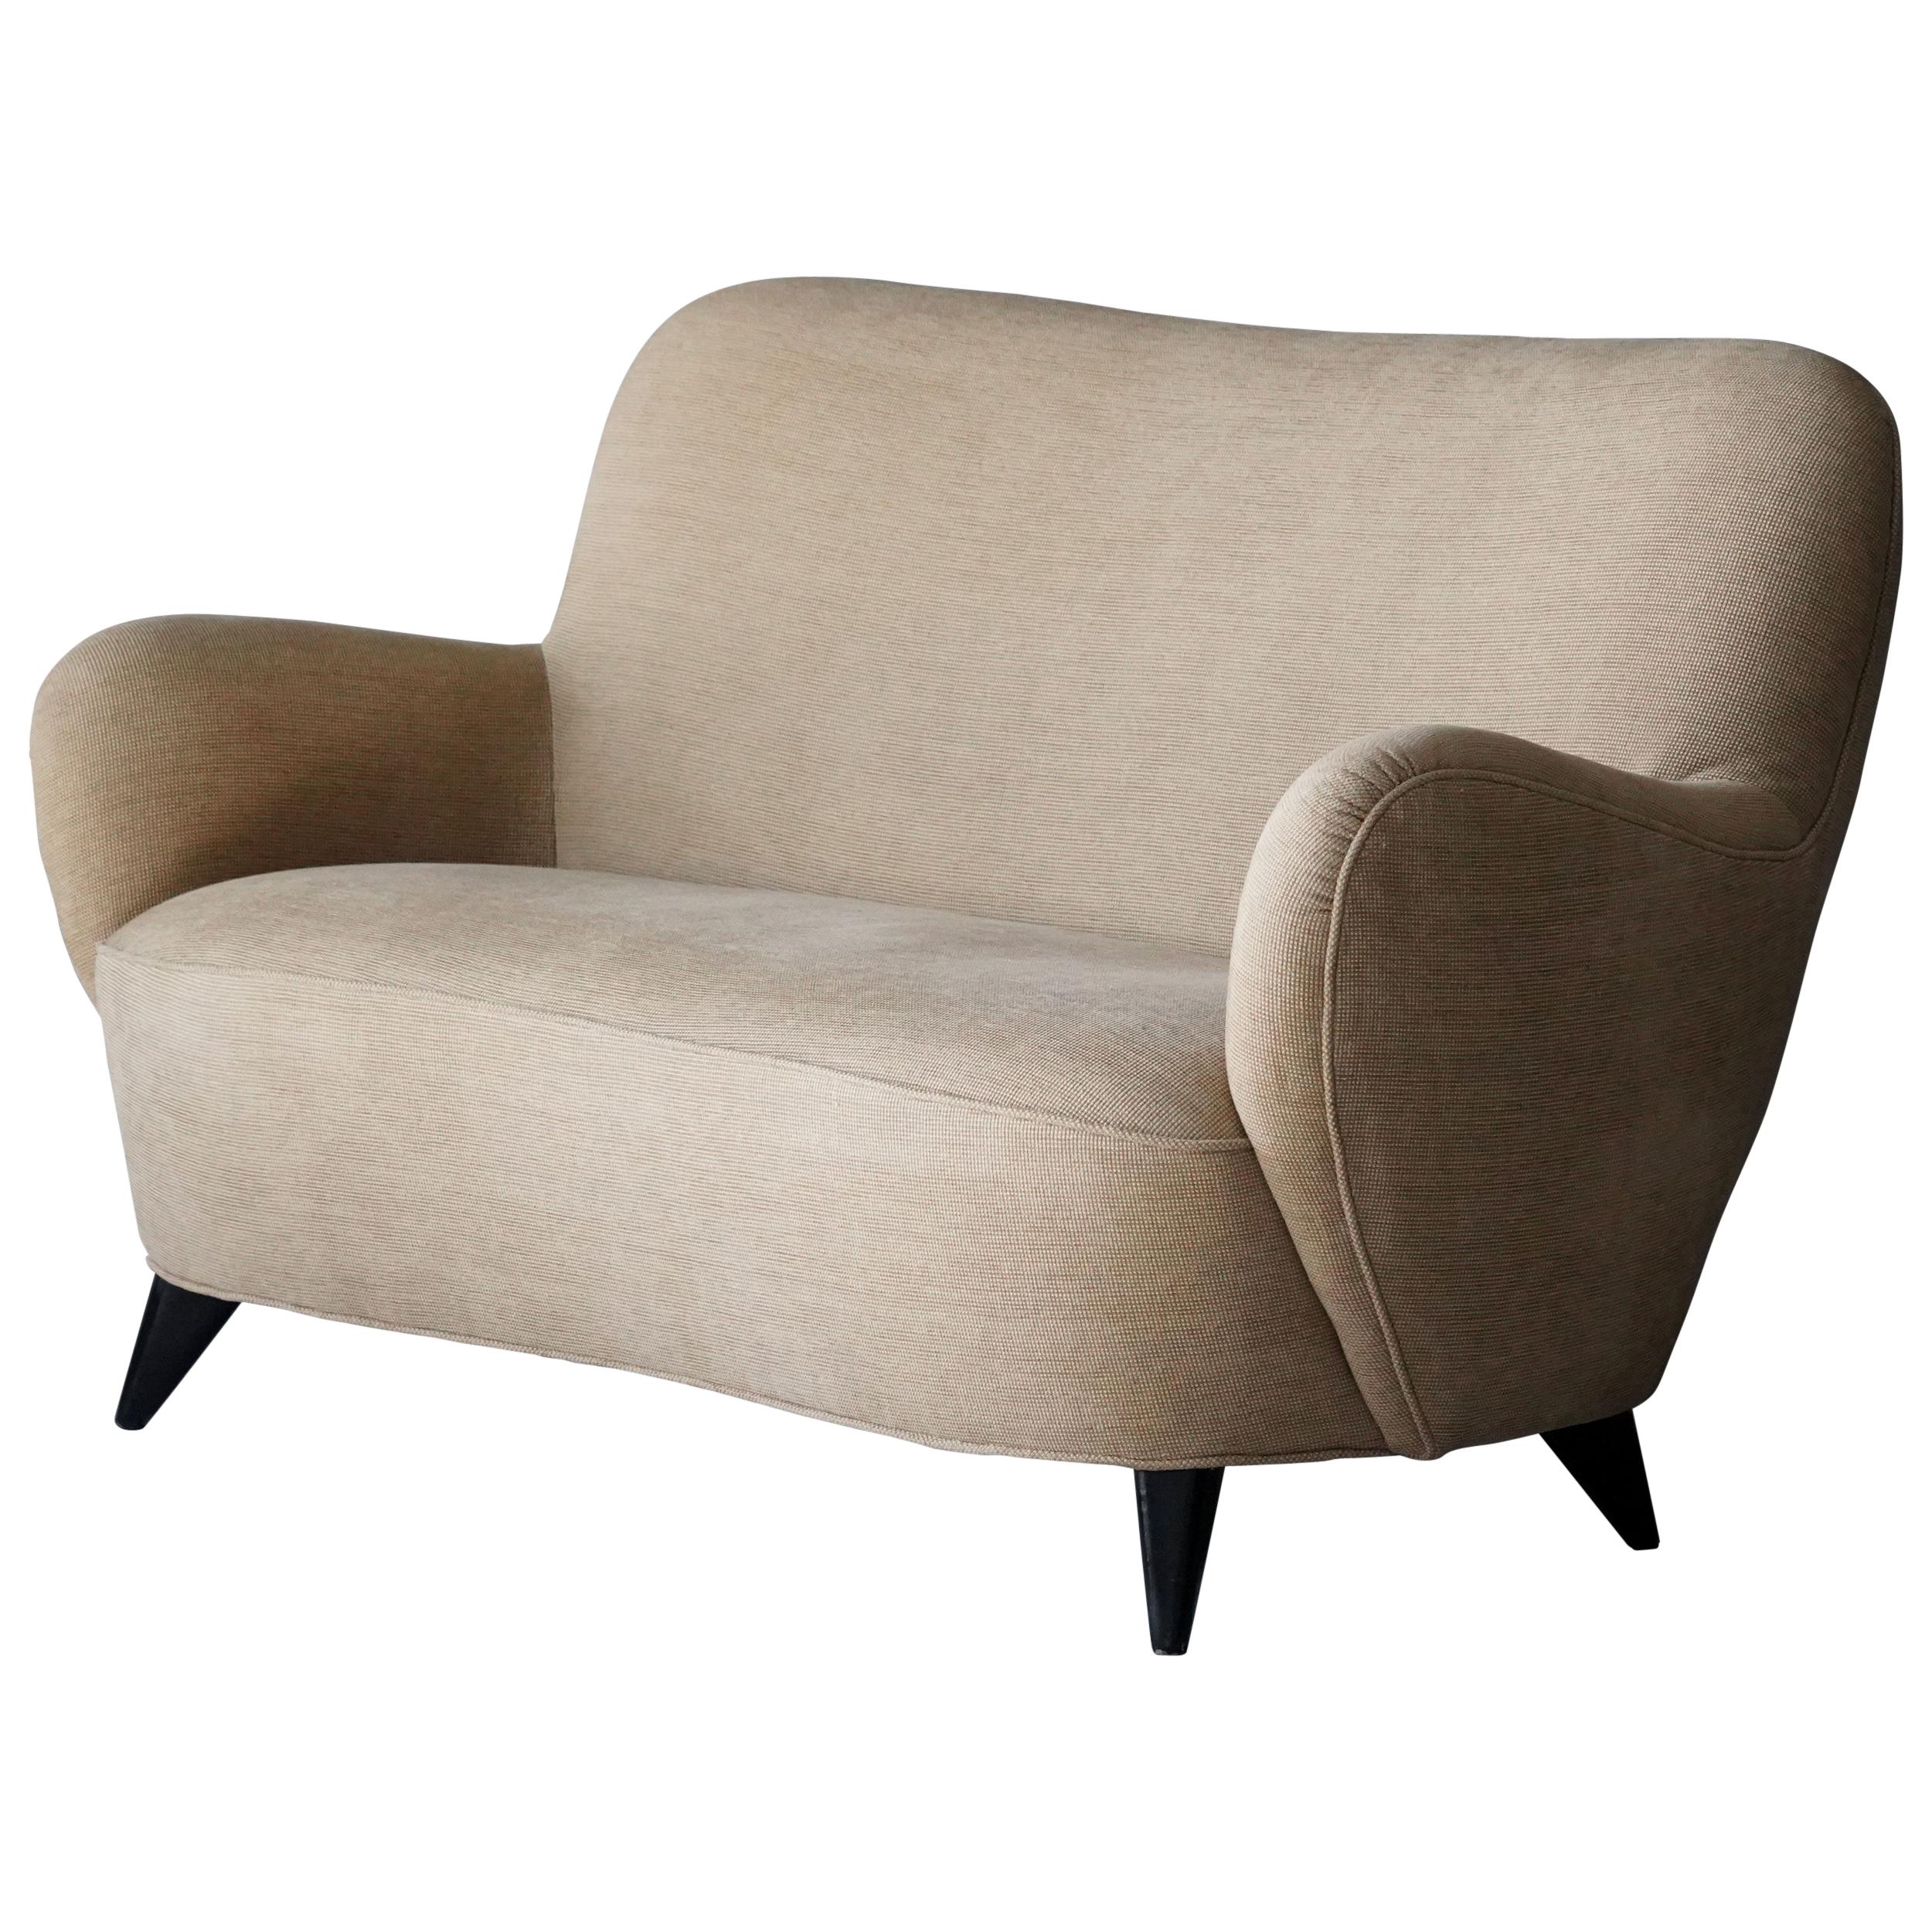 A settee / sofa, designed by Vladimir Kagan in 1947 and made by Kagan-Dreyfuss, Inc in the 1950s. The soft organic form rests on four tapered walnut legs. 

Other designers of the period include Jean Royère, Gio Ponti, Isamu Noguchi, and Edward